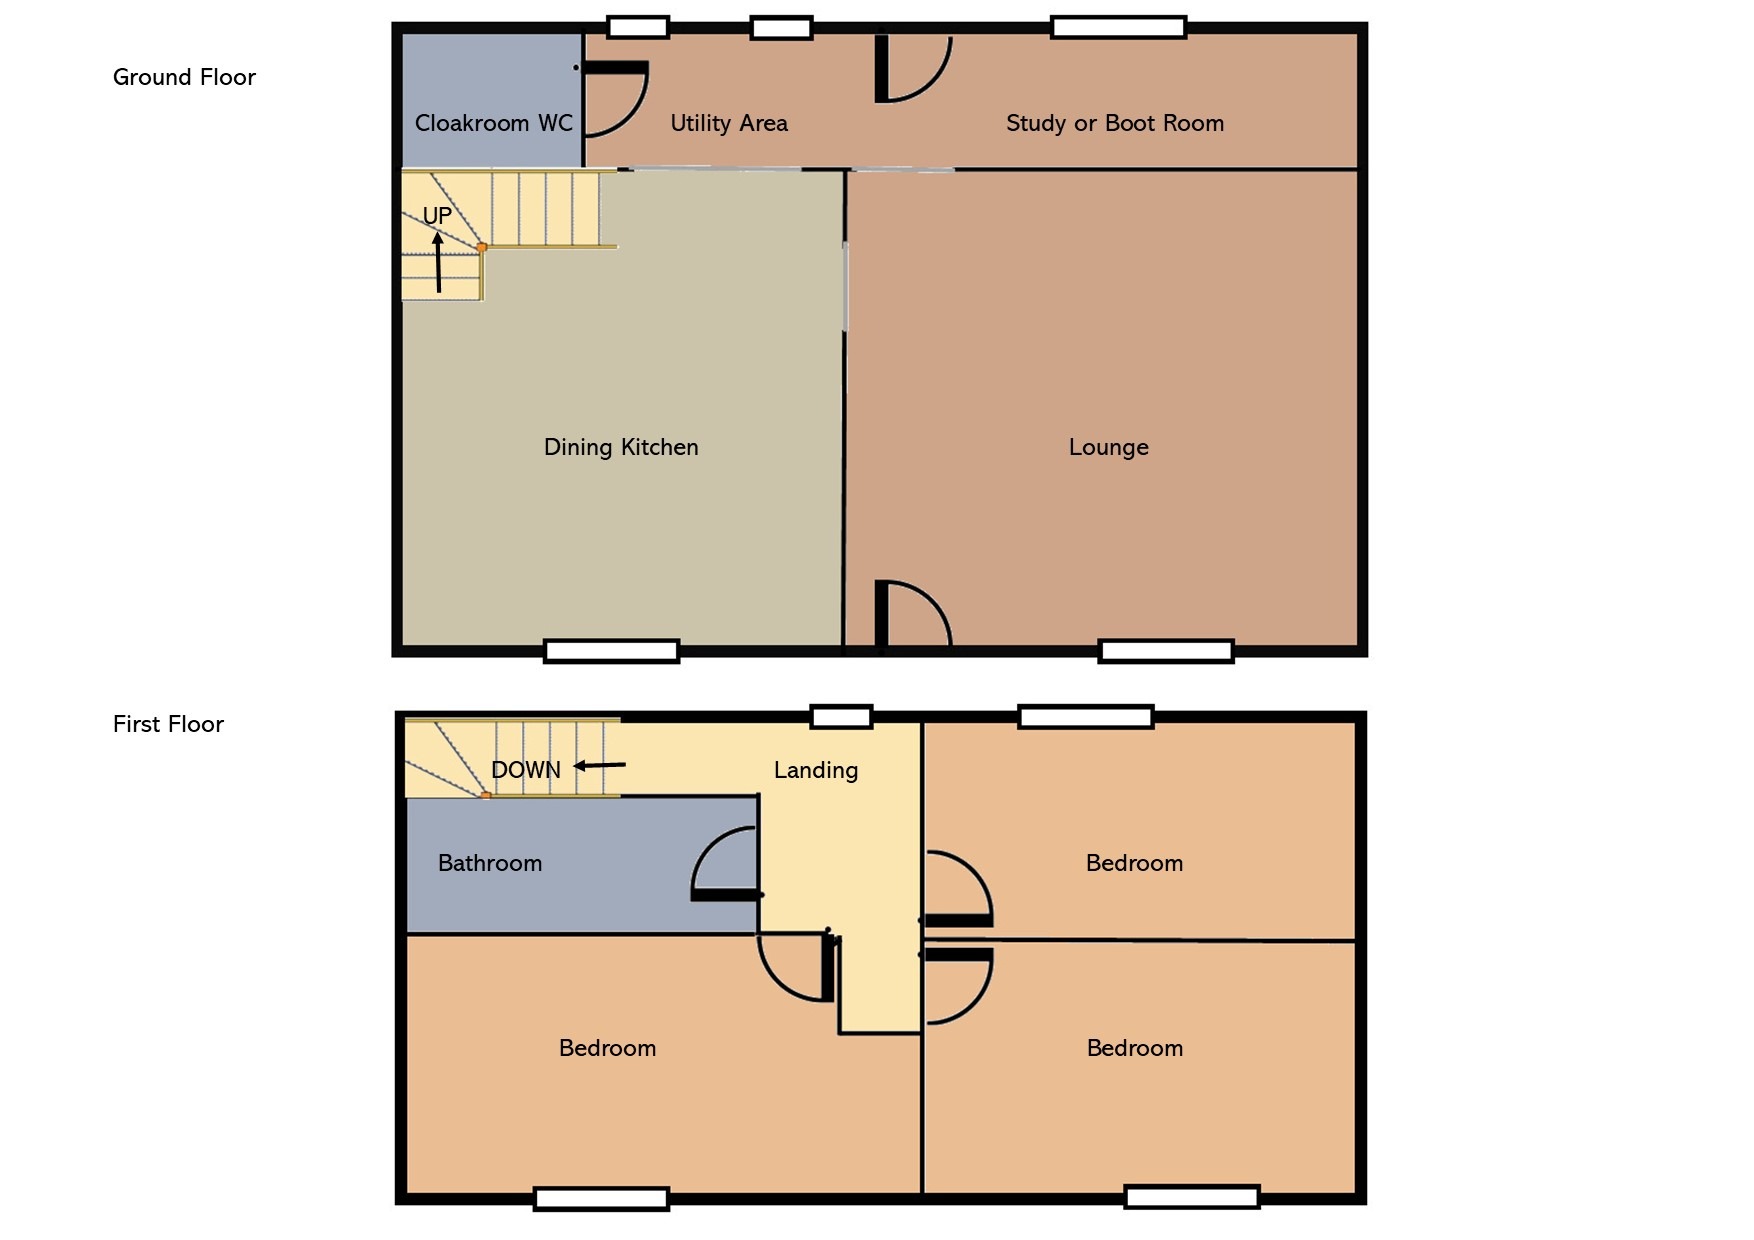 3 bed end of terrace house for sale - Property floorplan